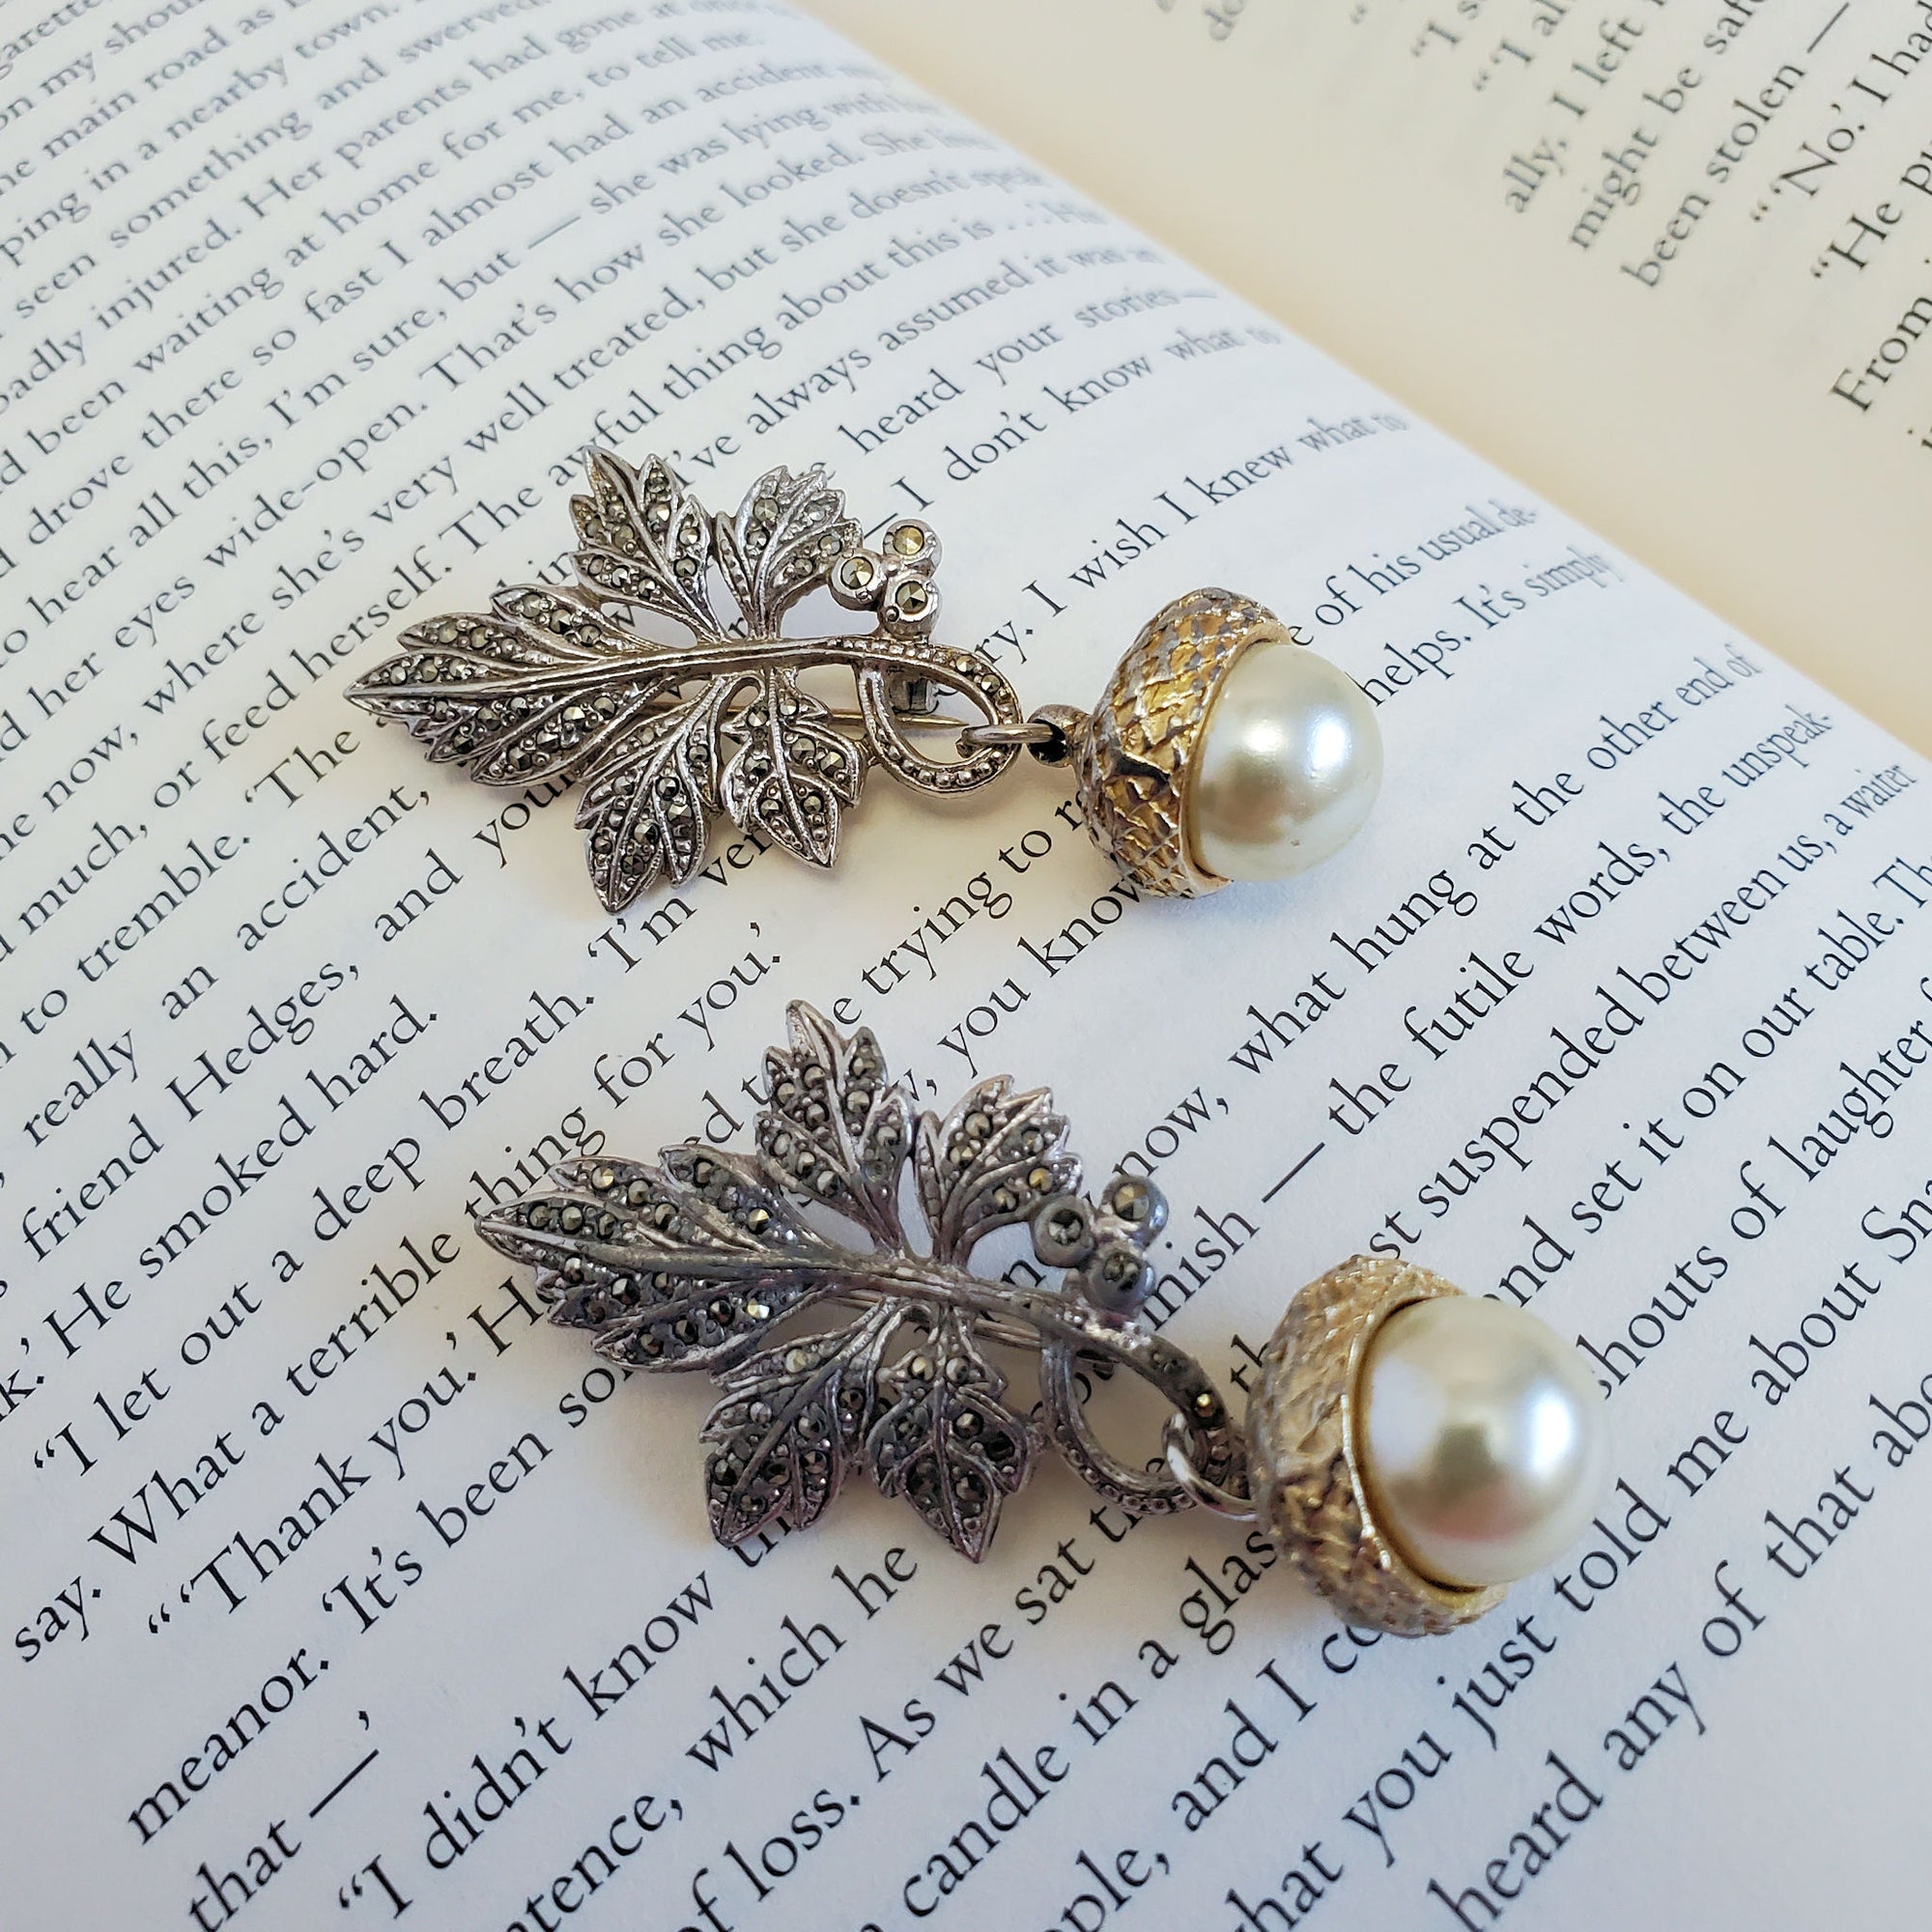 Silver-tone Leaf Duet brooches with Gold-tone Acorn Accents